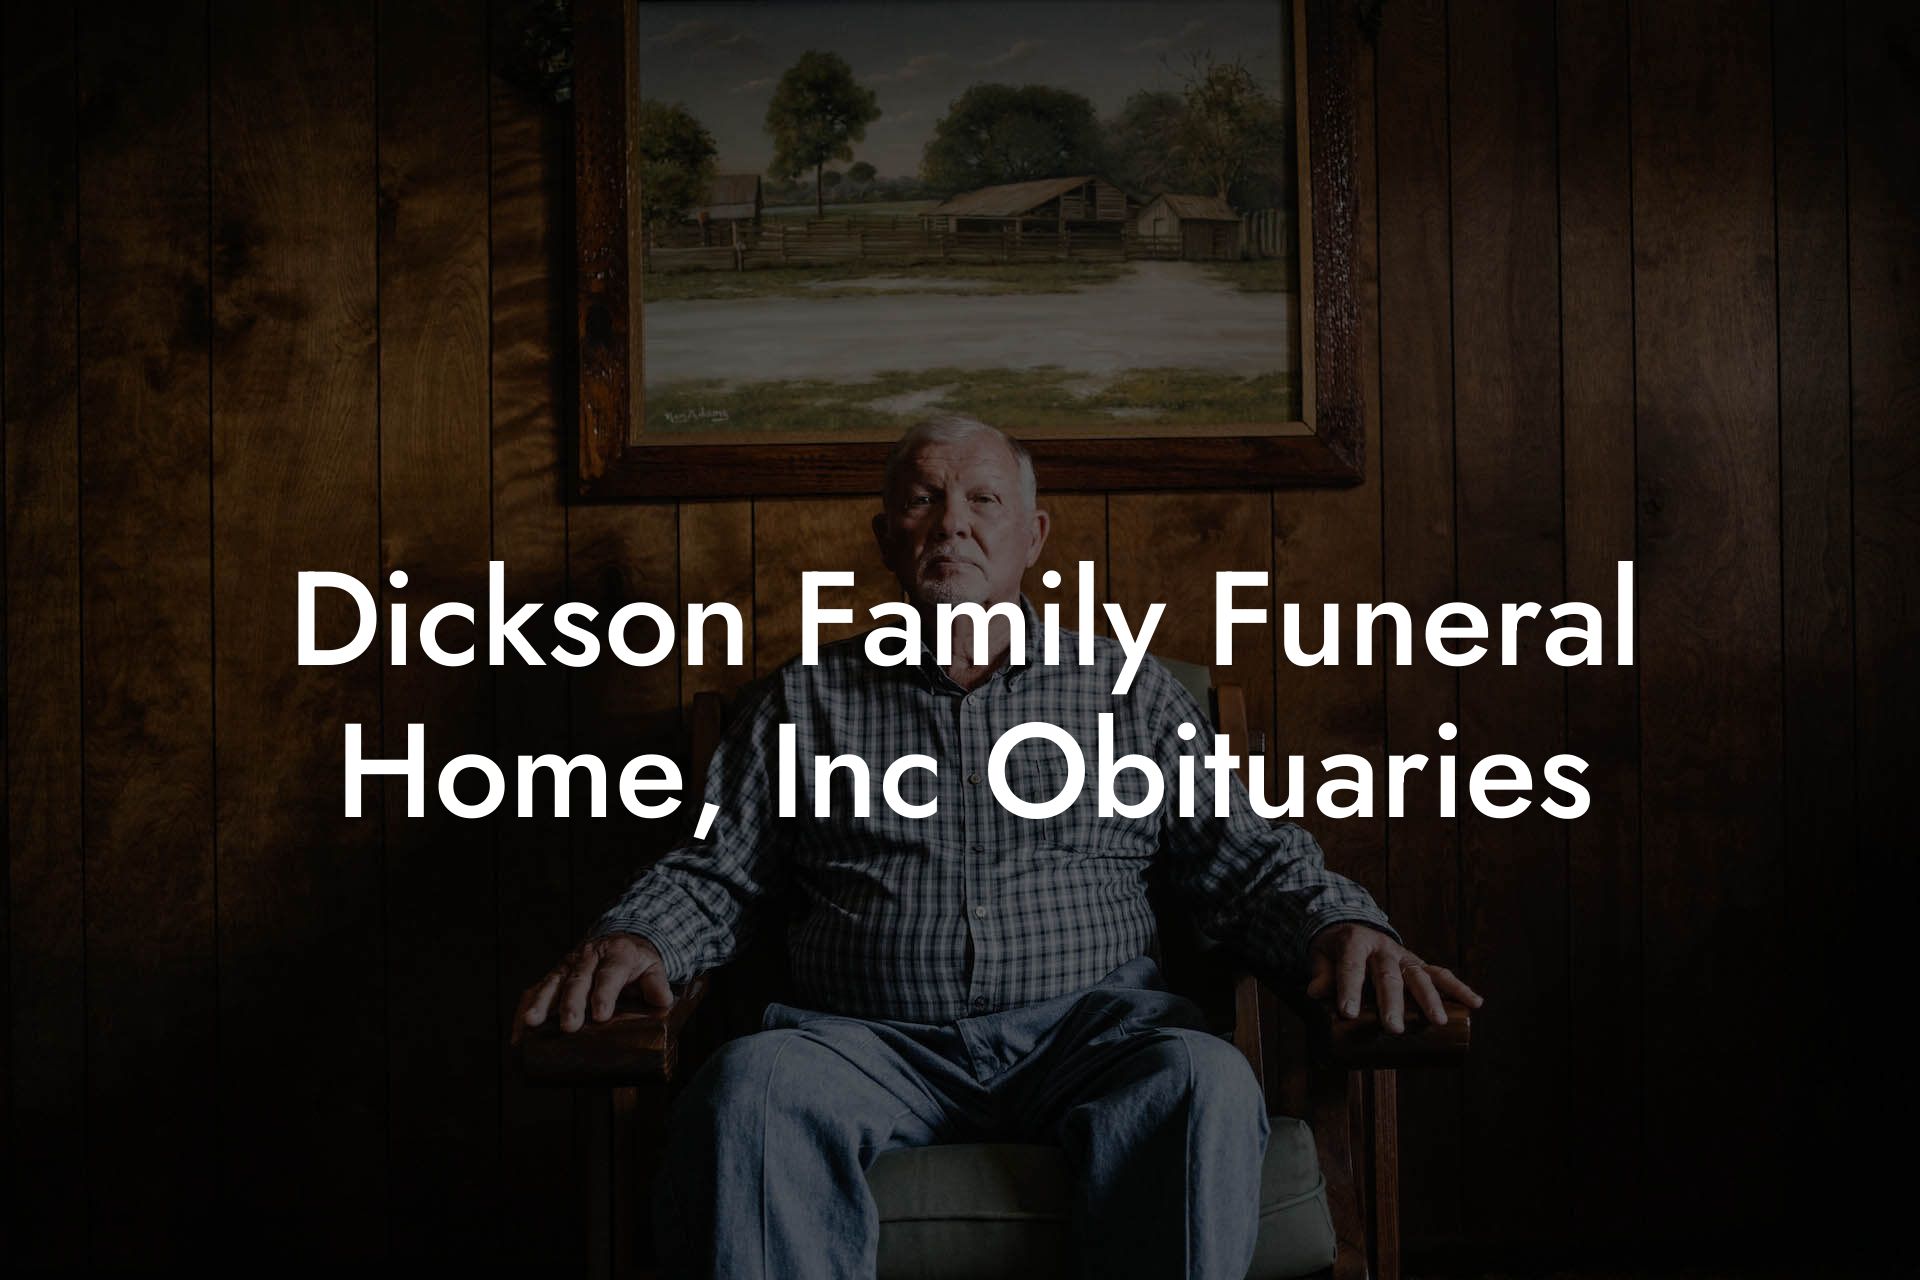 Dickson Family Funeral Home, Inc Obituaries